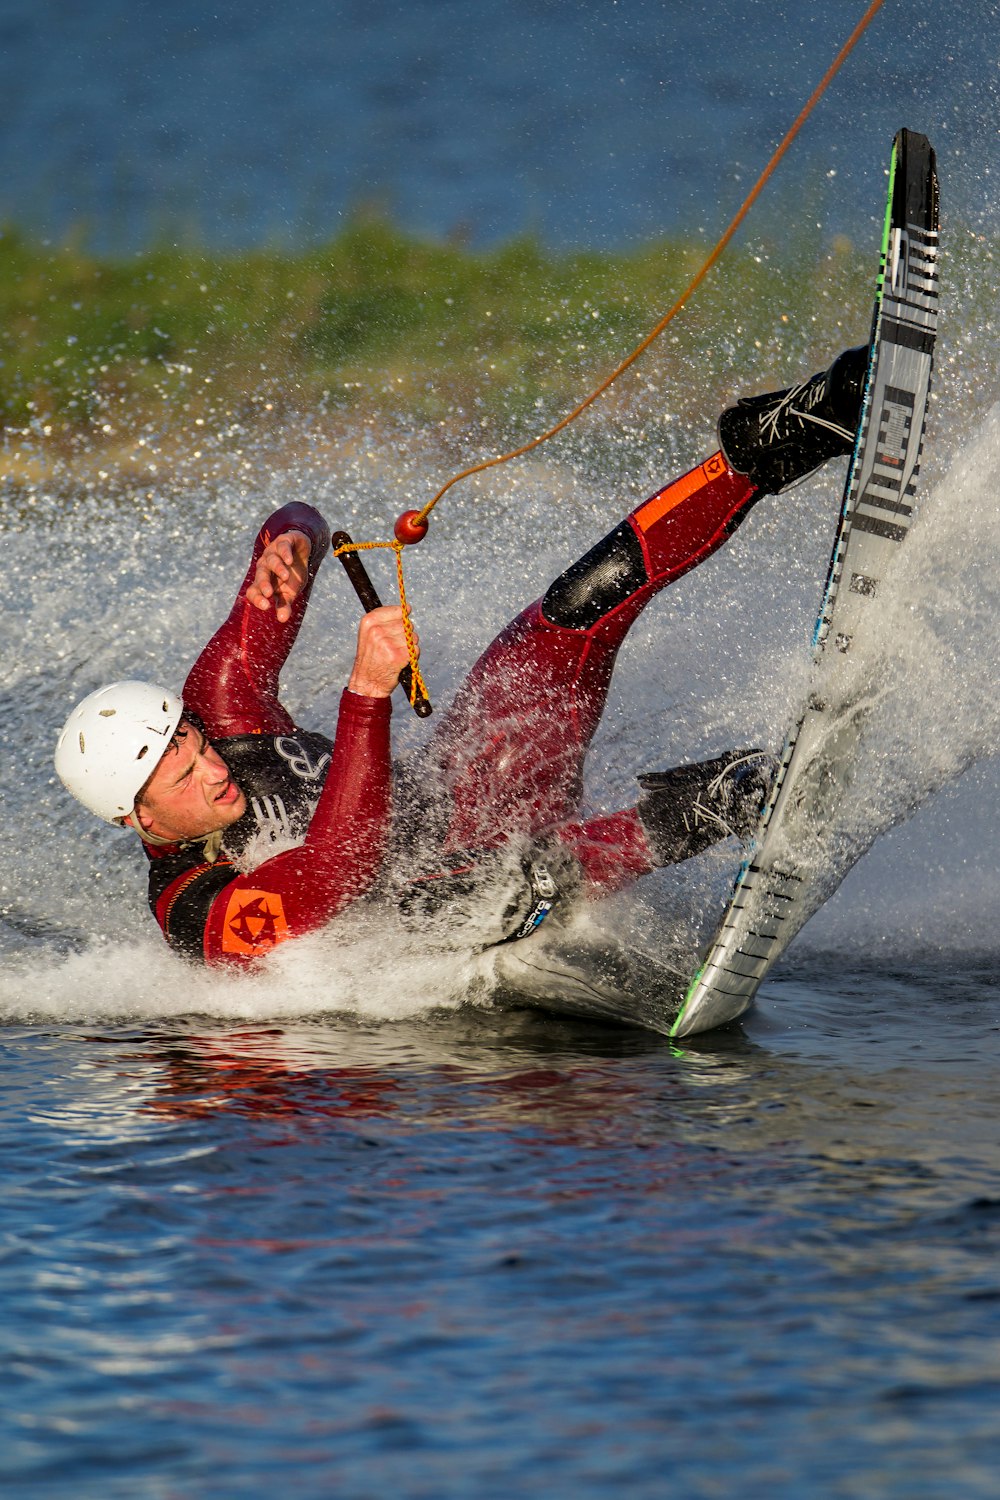 a man on water skis being pulled by a boat